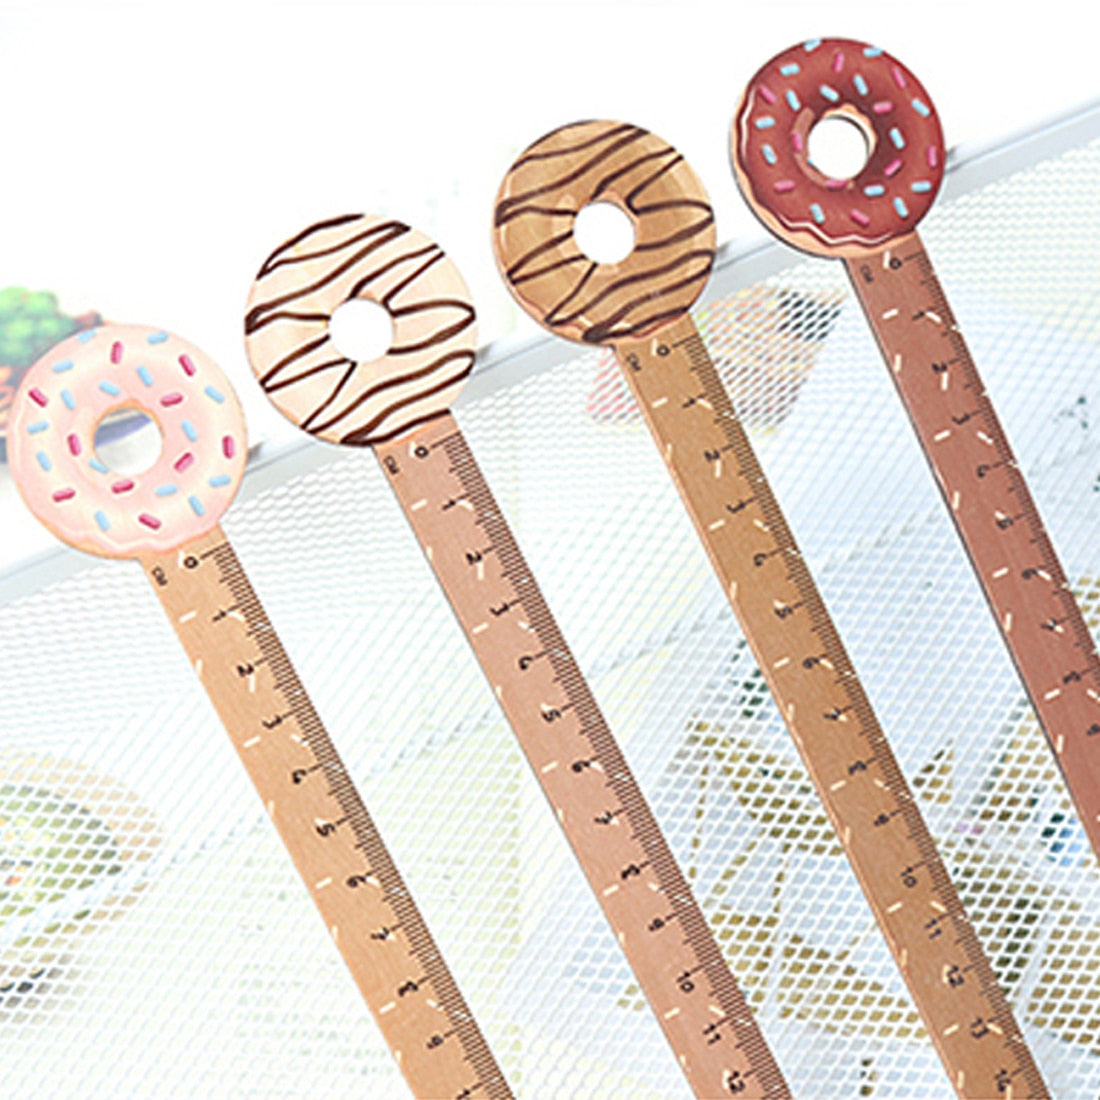 Donuts Wooden Ruler